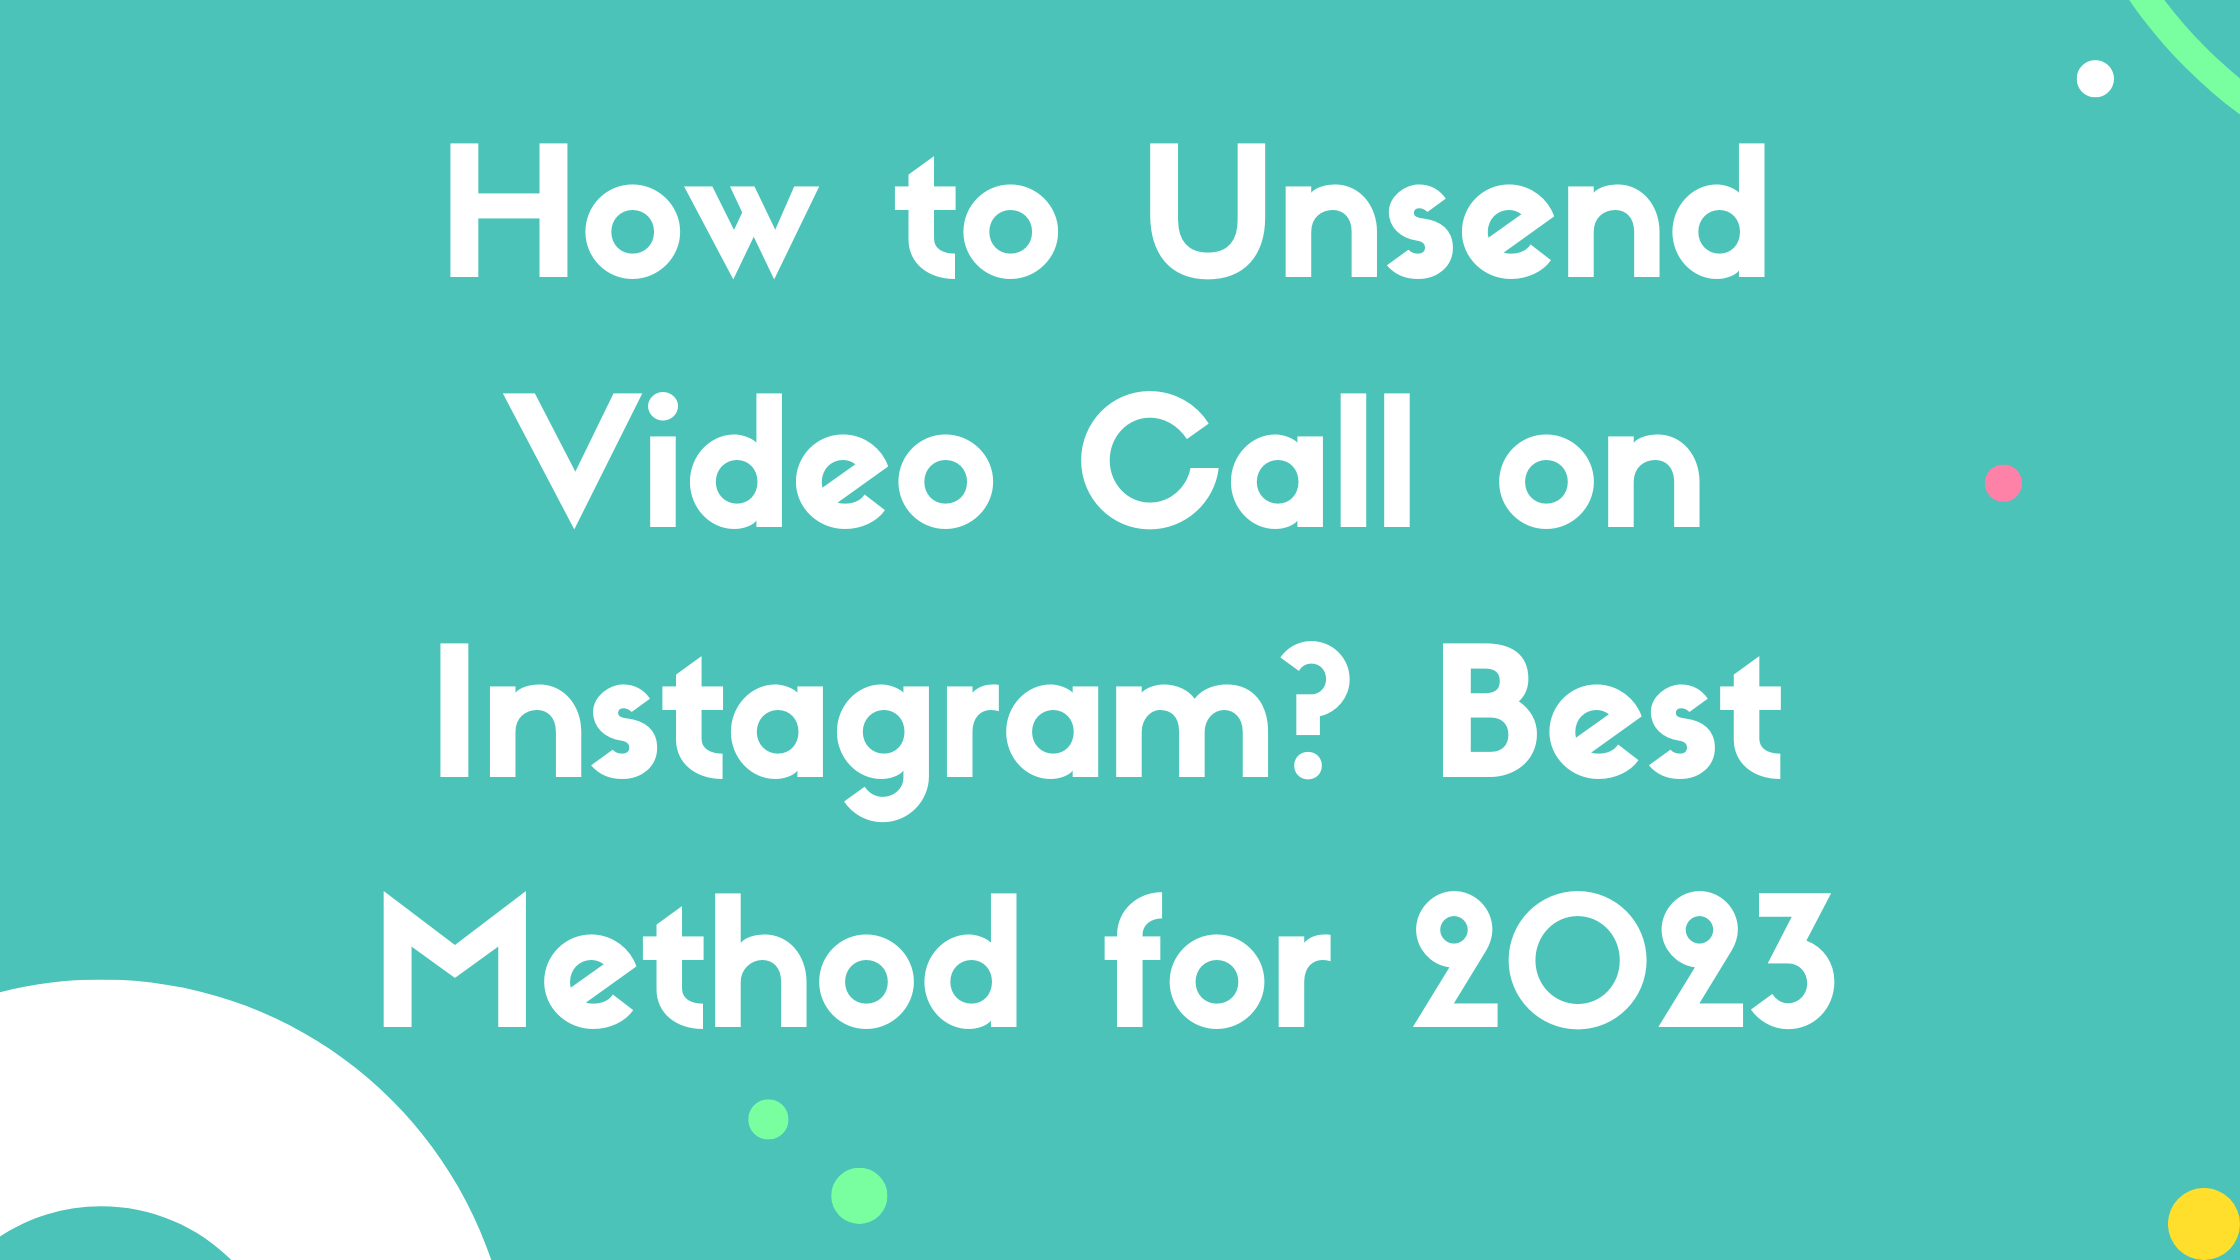 How to Unsend Video Call on Instagram?